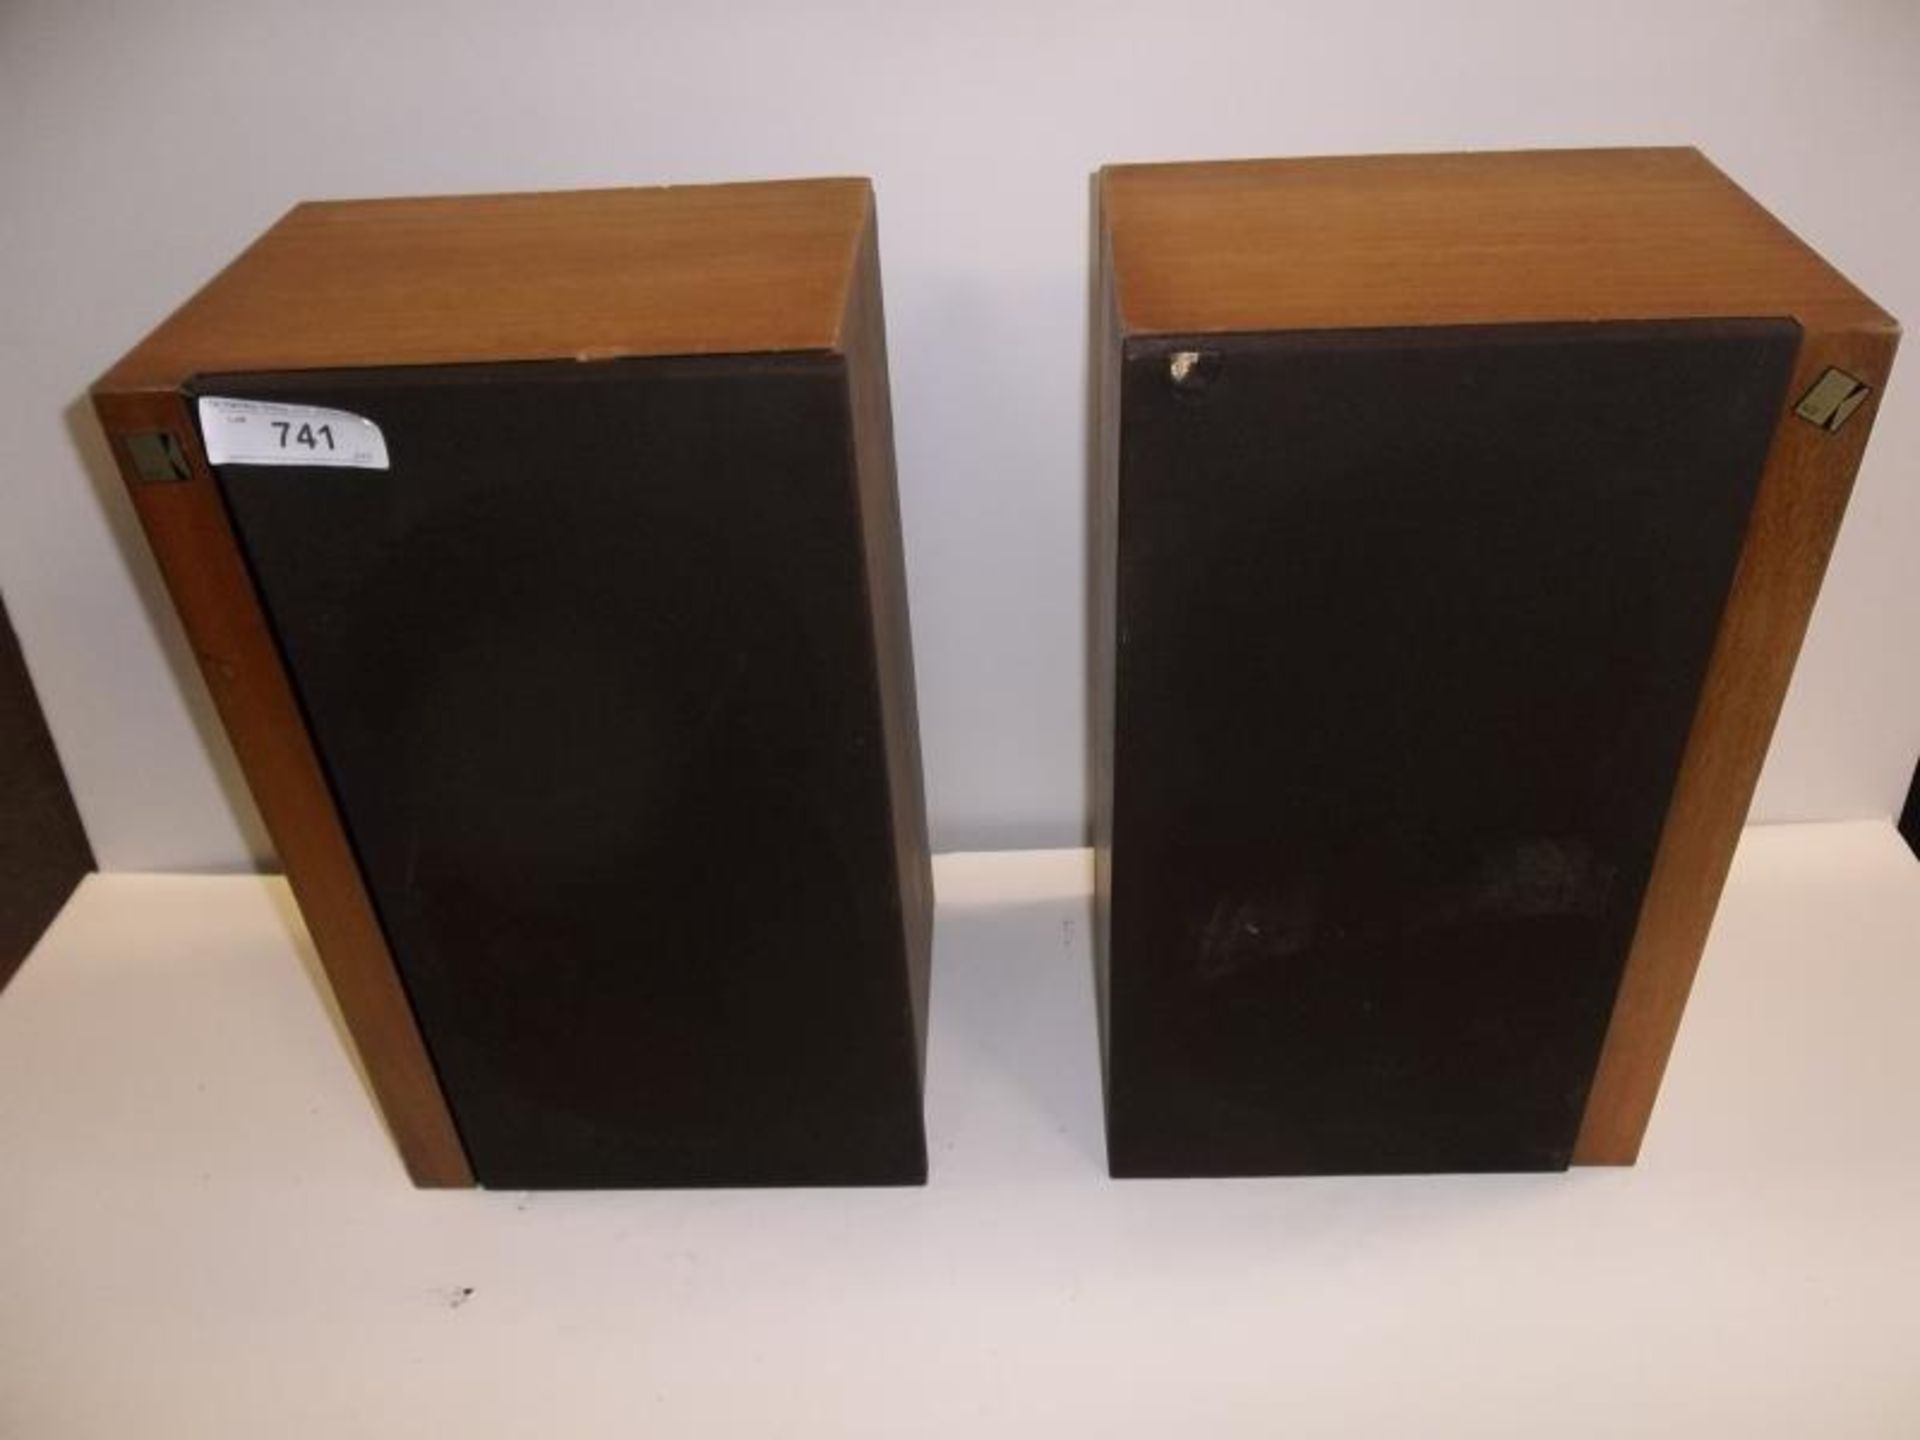 2 KEF Speakers, model 48799, 48800, wood cases are faded, stained, chipped, velcro on one, fabric